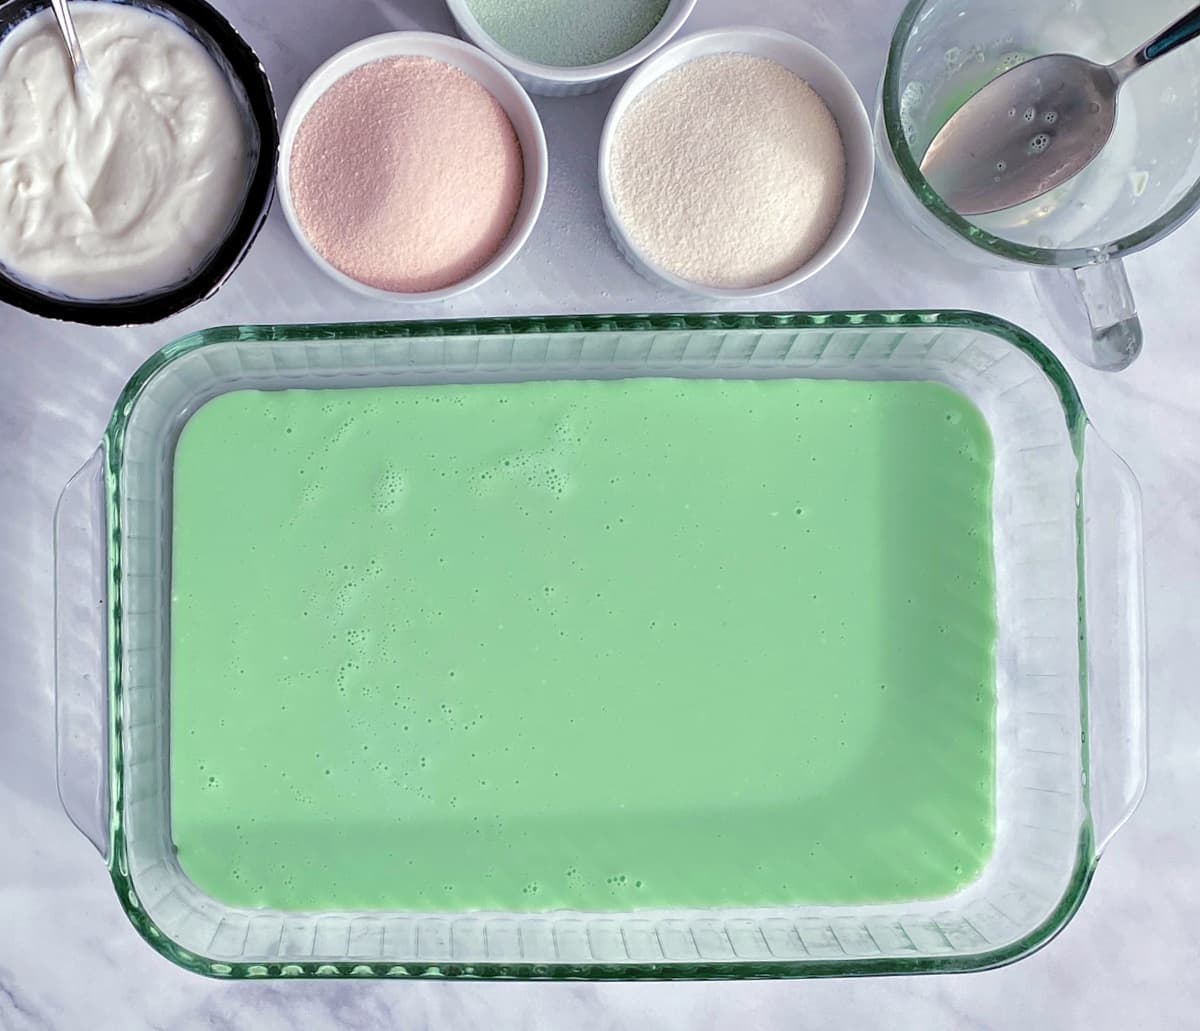 pastel green jello layer in pyrex casserole dish. Dry gelatin mix and yogurt in bowls at top of shot.